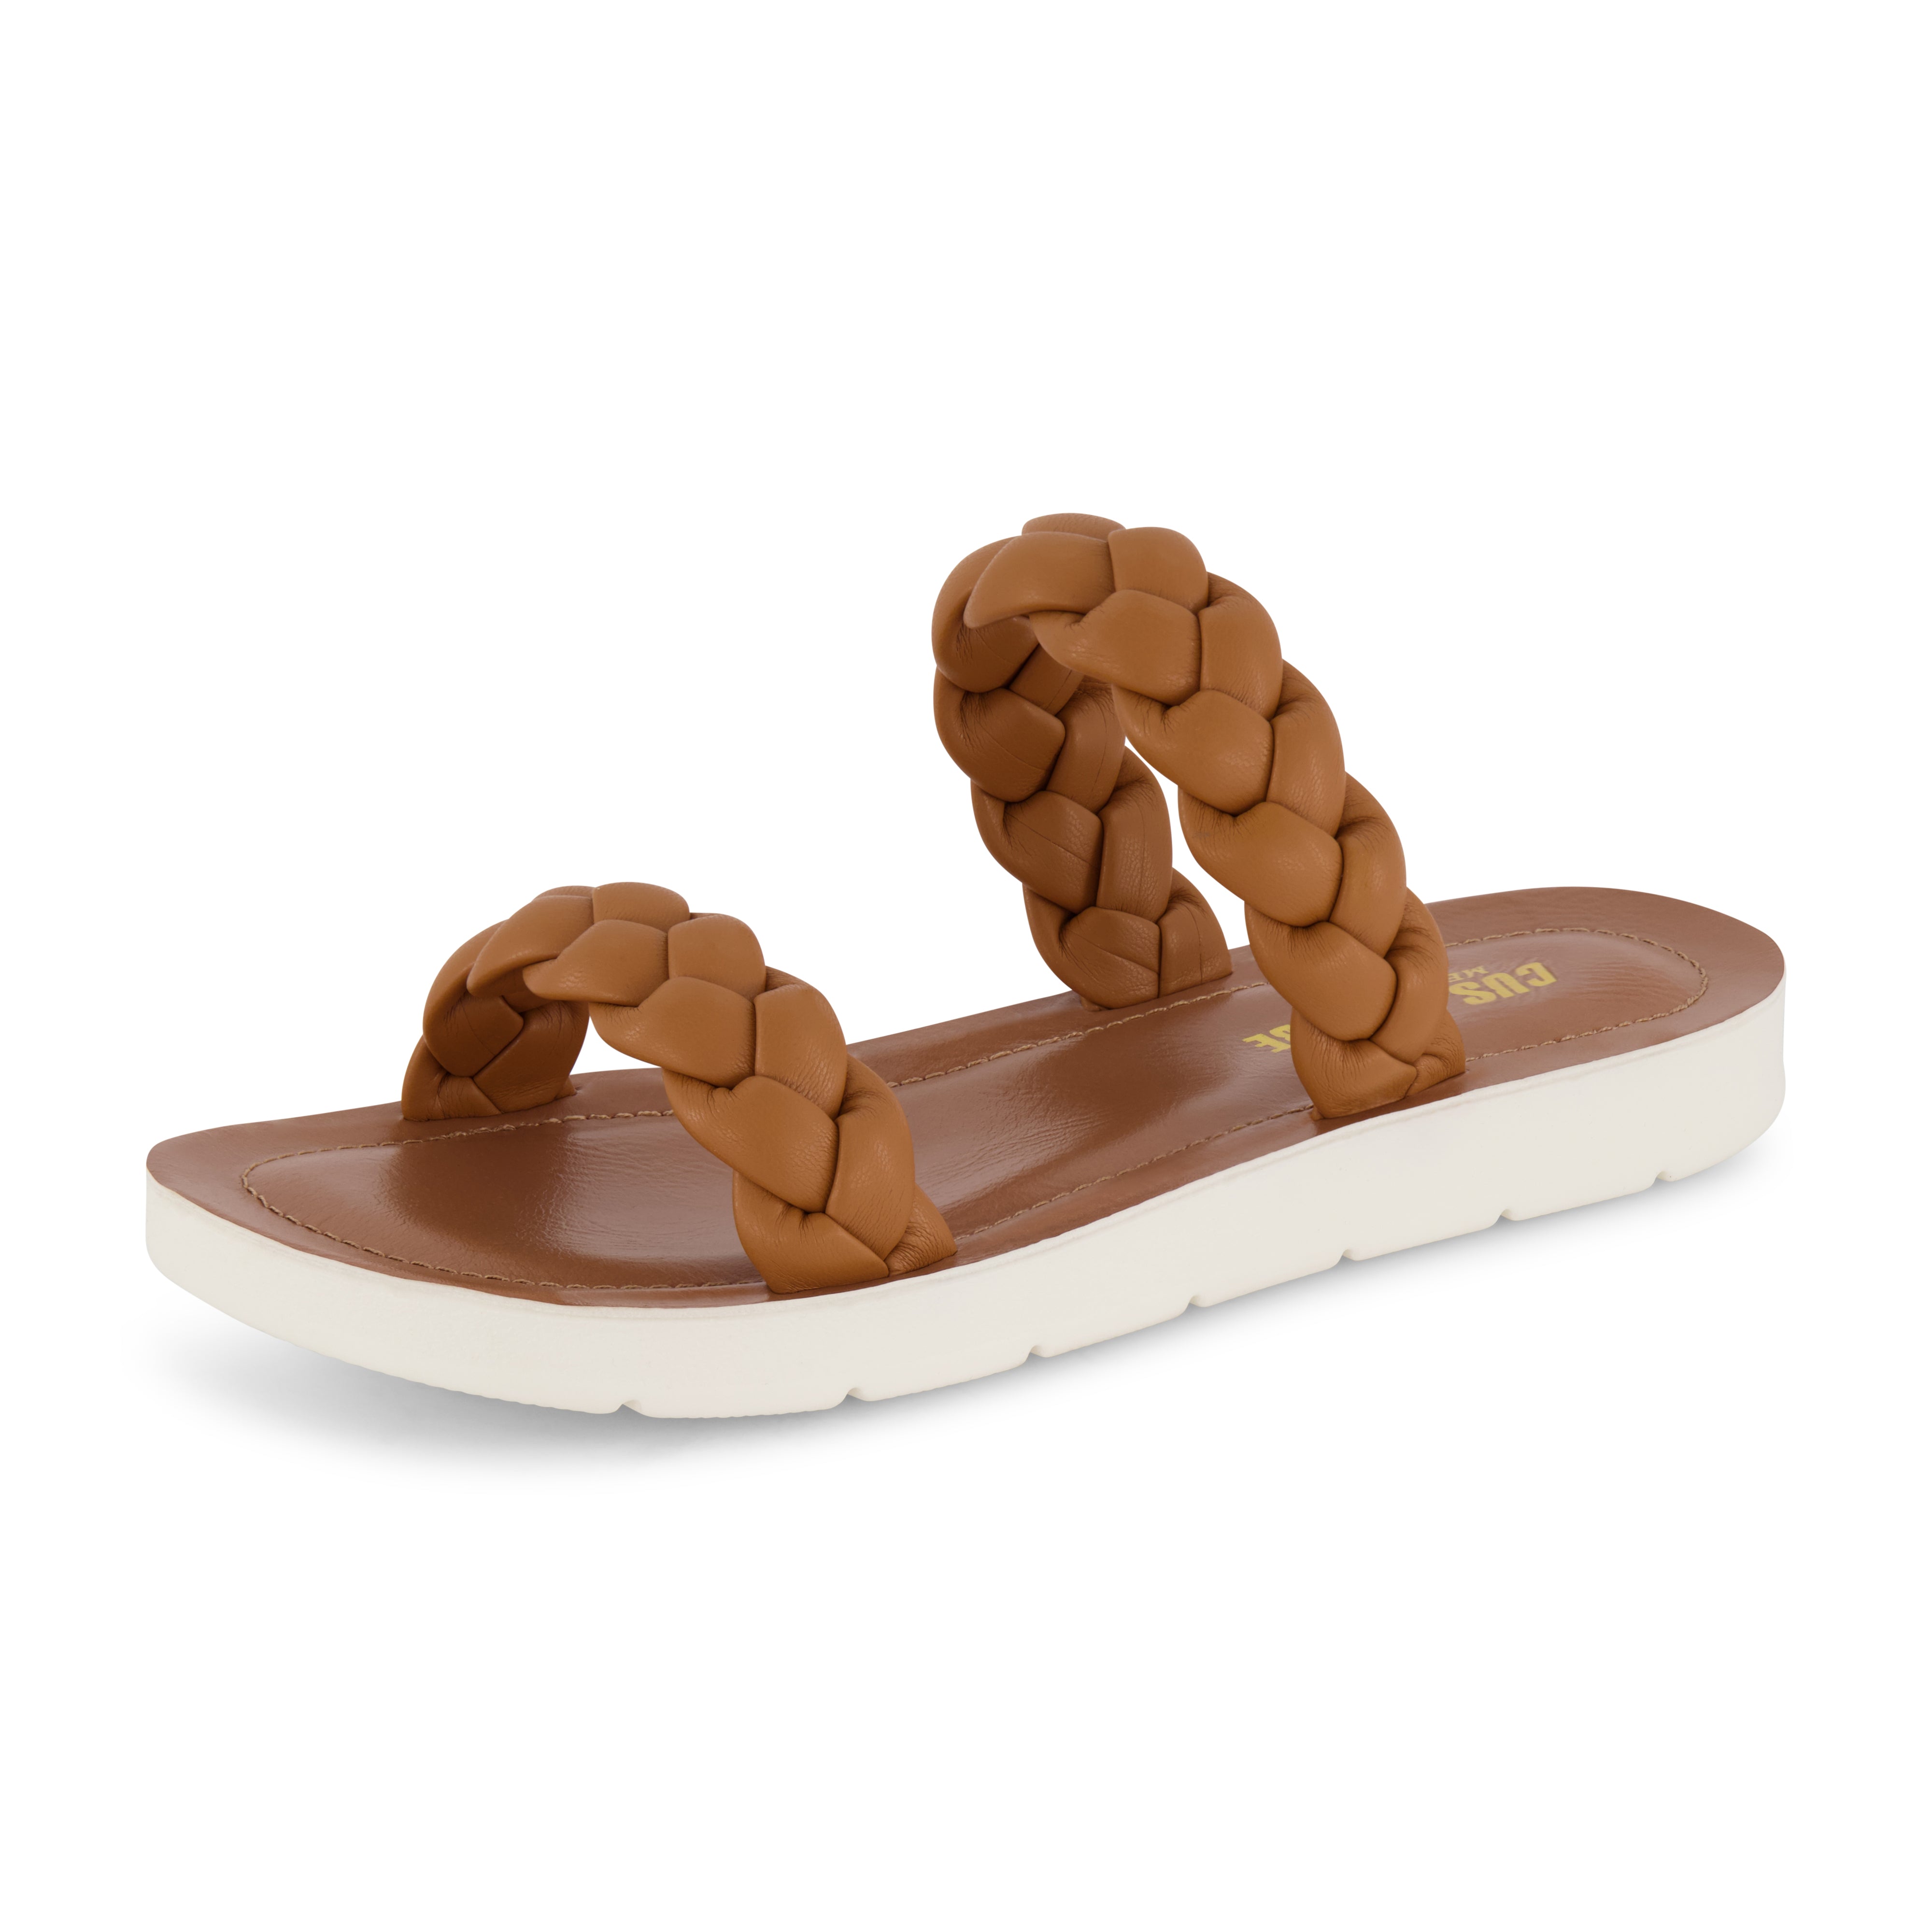 Zirinas with a wide jute upper and leather strap - Women's sandals